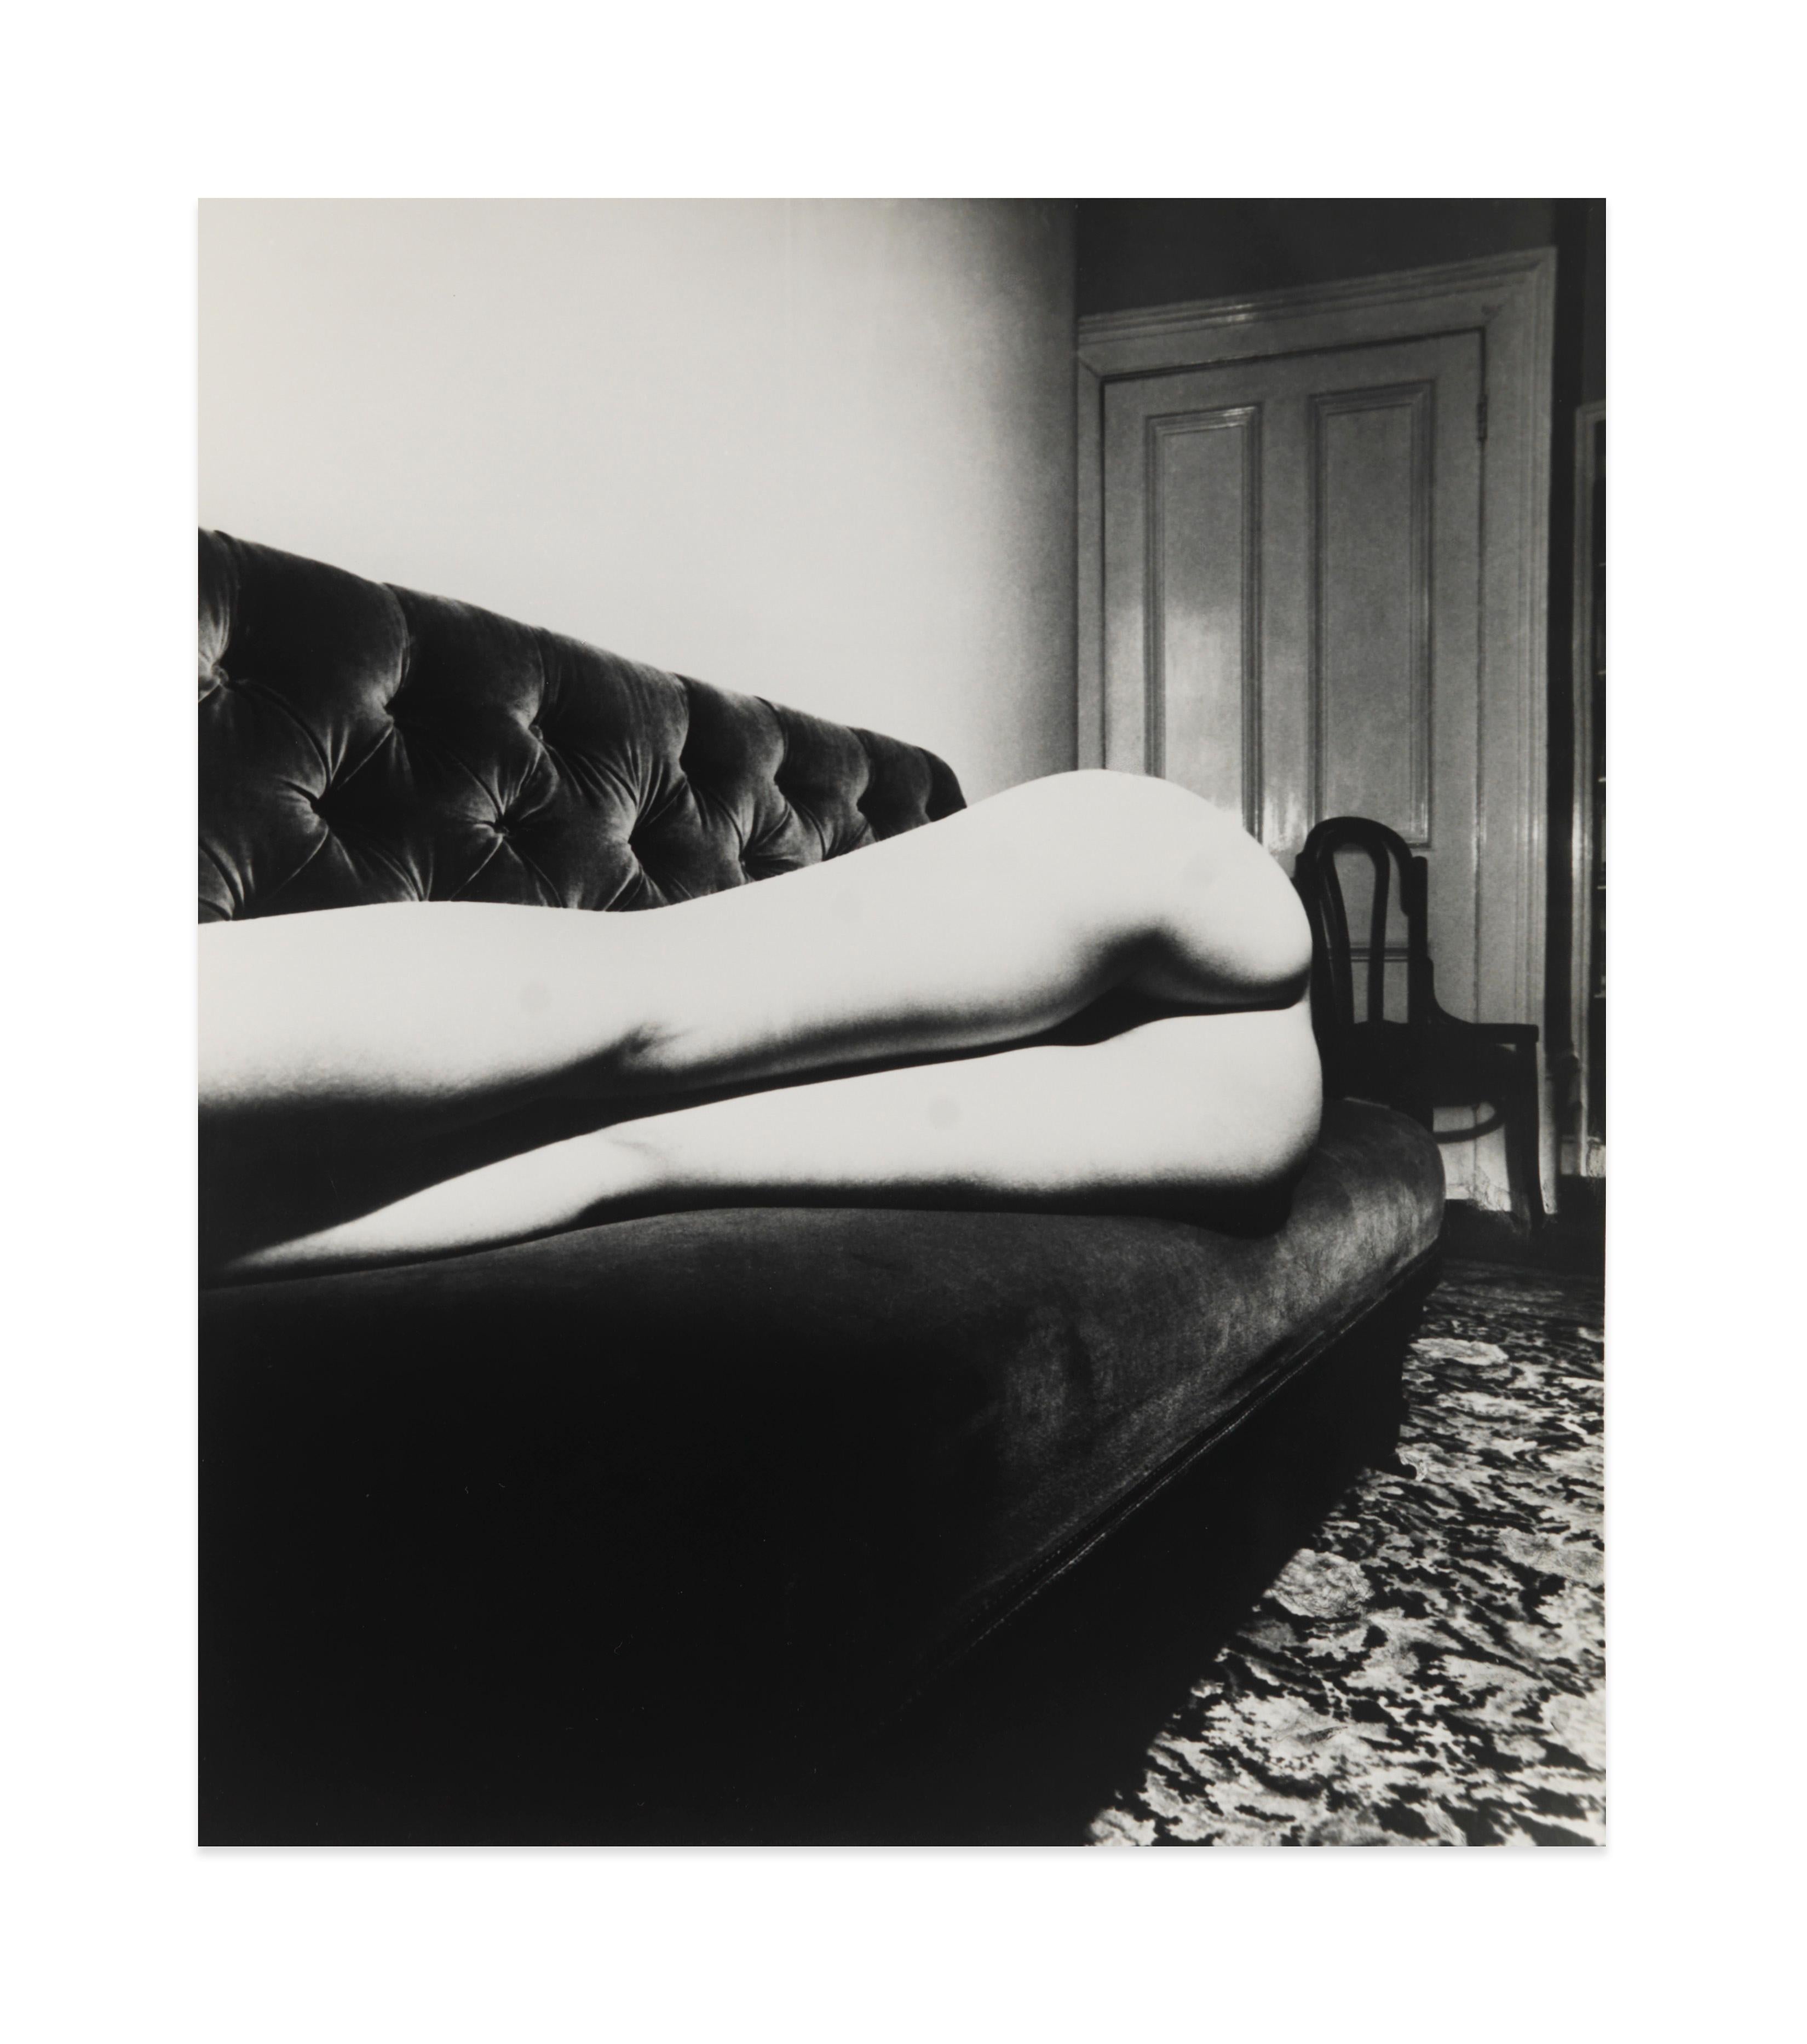 Nude, Hampstead, London - Photograph by Bill Brandt